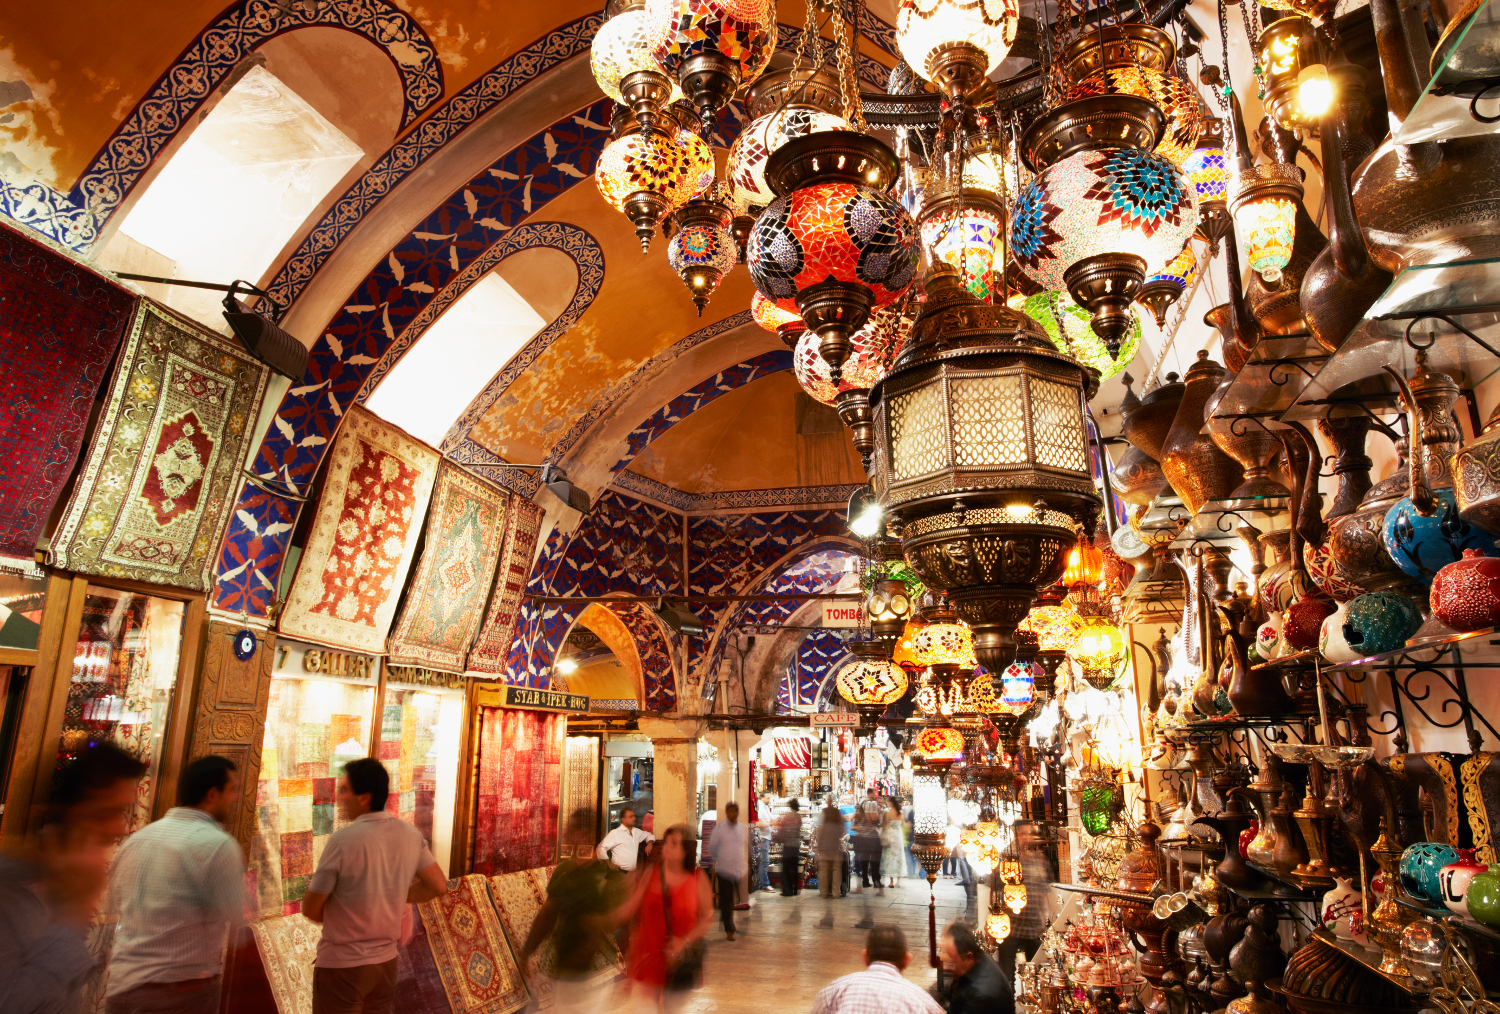 Navigating Istanbul's frenetic Grand Bazaar is energy-sapping. Food stops are essential for survival. Image by Gary Yeowell / The Image Bank / Getty